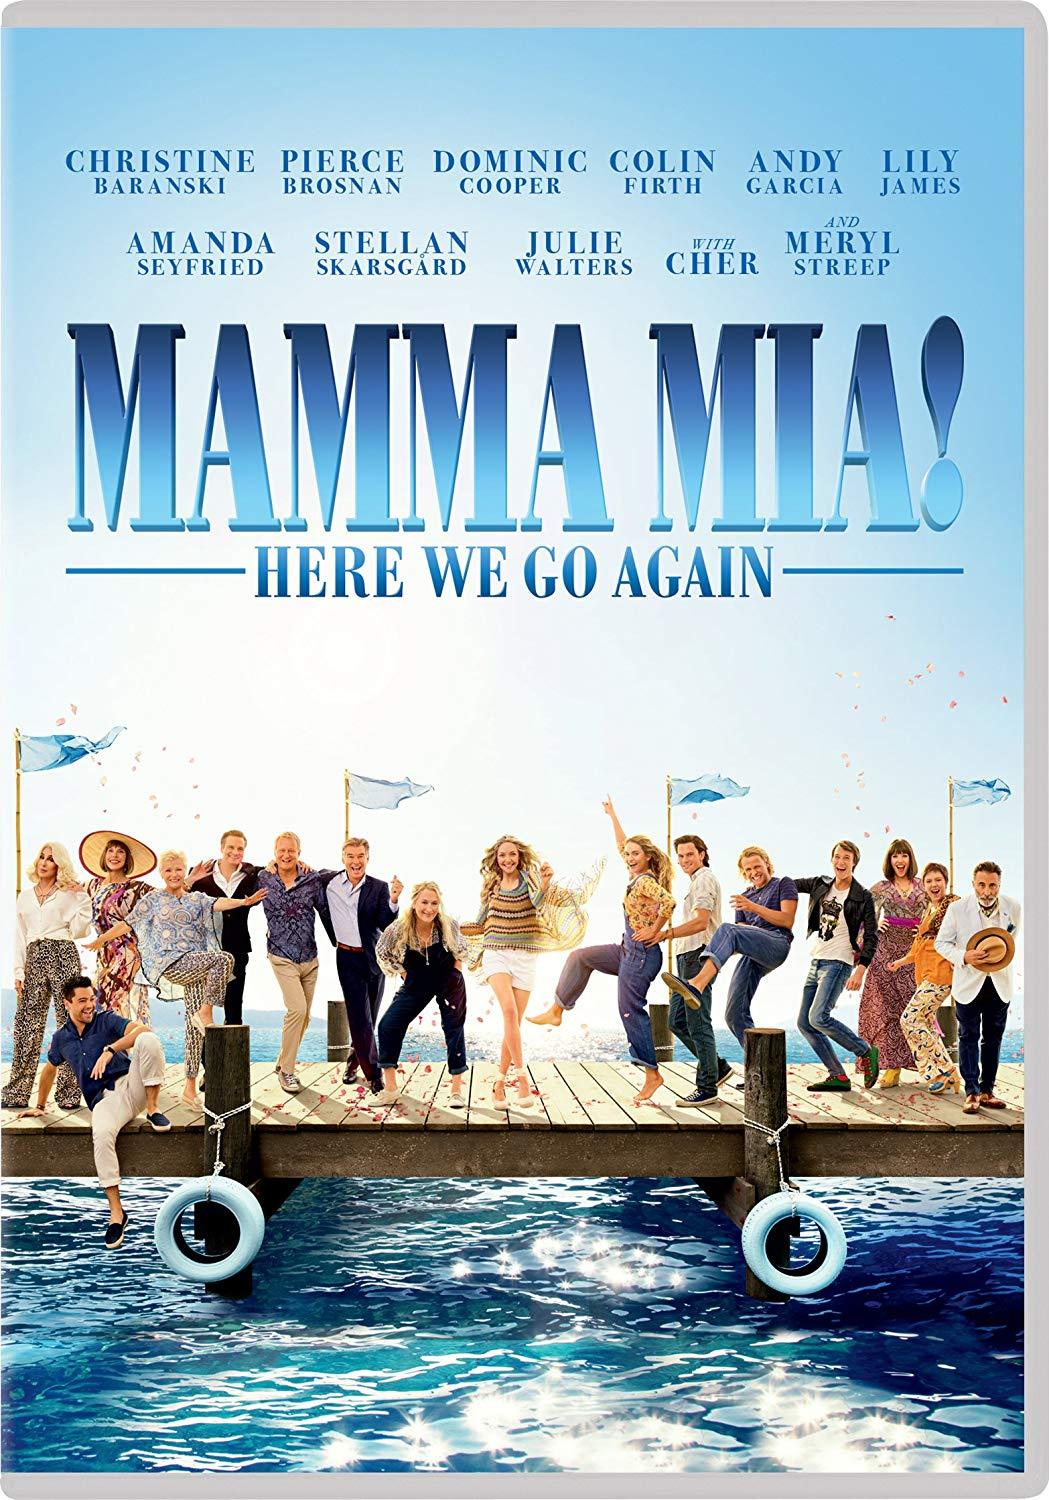 Mamma Mia! Here we go again [DVD] (2018).  Directed by Ol Parker.